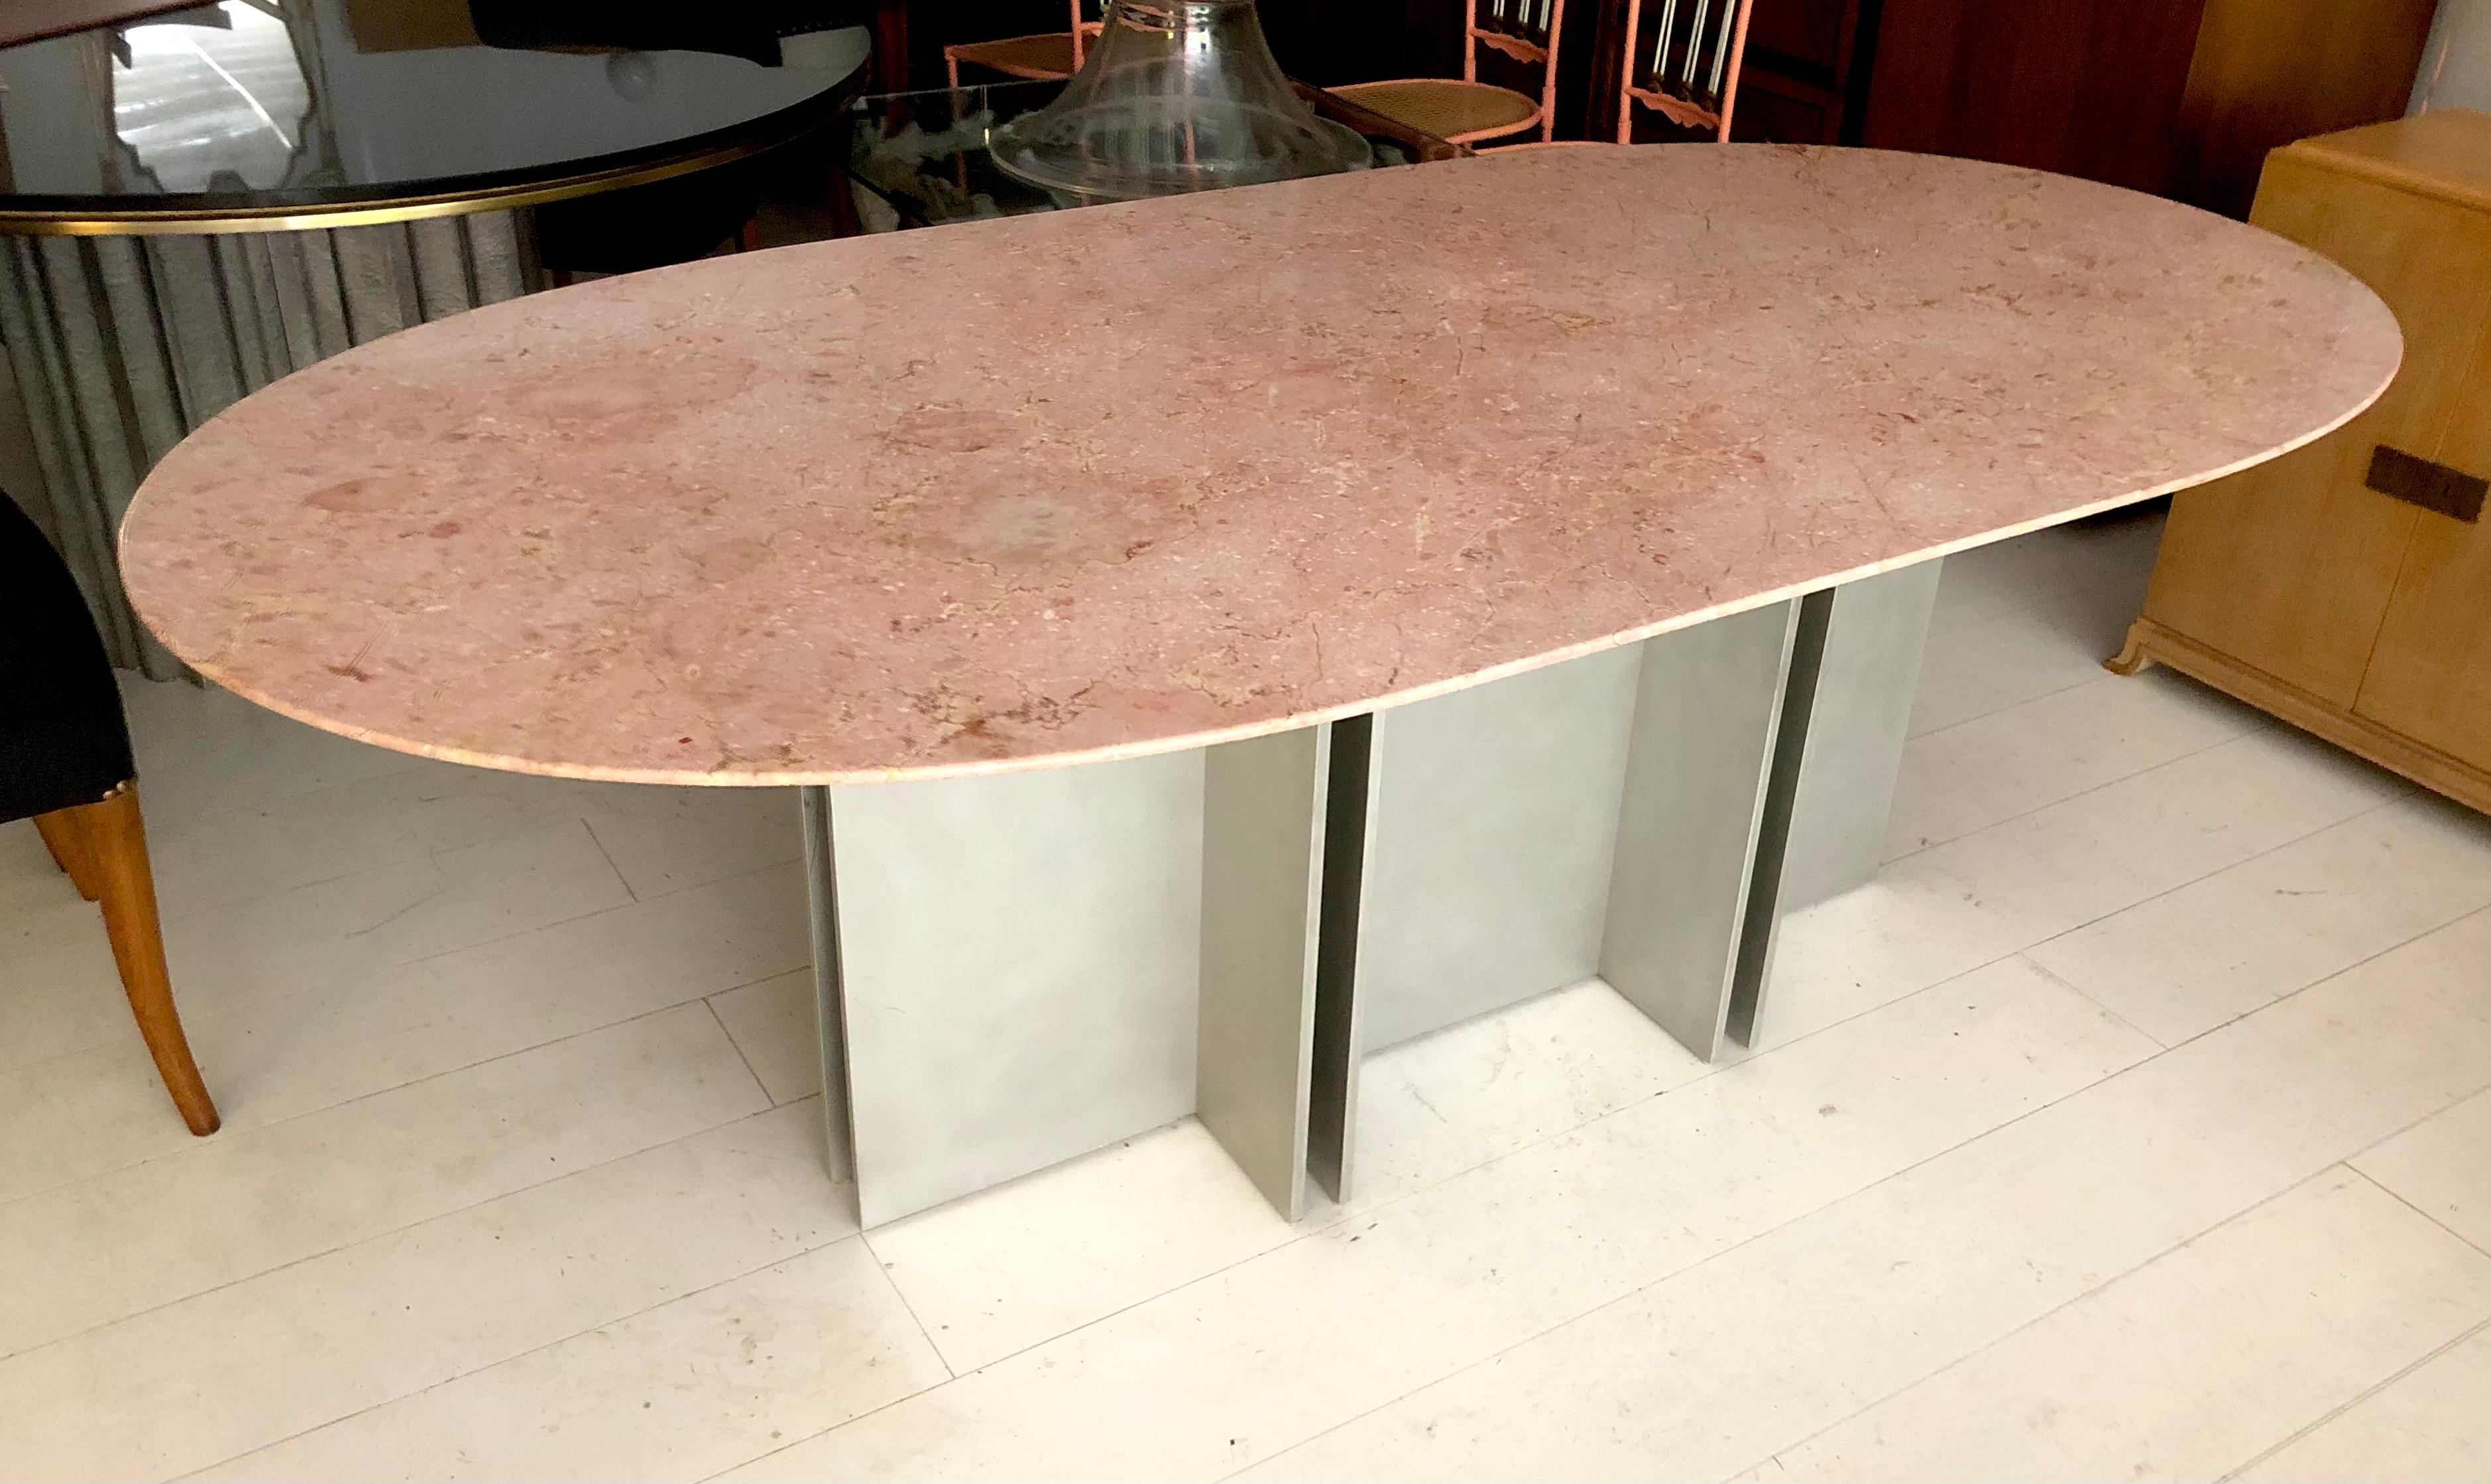 c. 1970s, likely Italian, the architectural, heavy gauge aluminum base supports a thick oval marble top carved with razor edge bevel. Would make an impressive desk. Designer unknown but incredible build quality and design